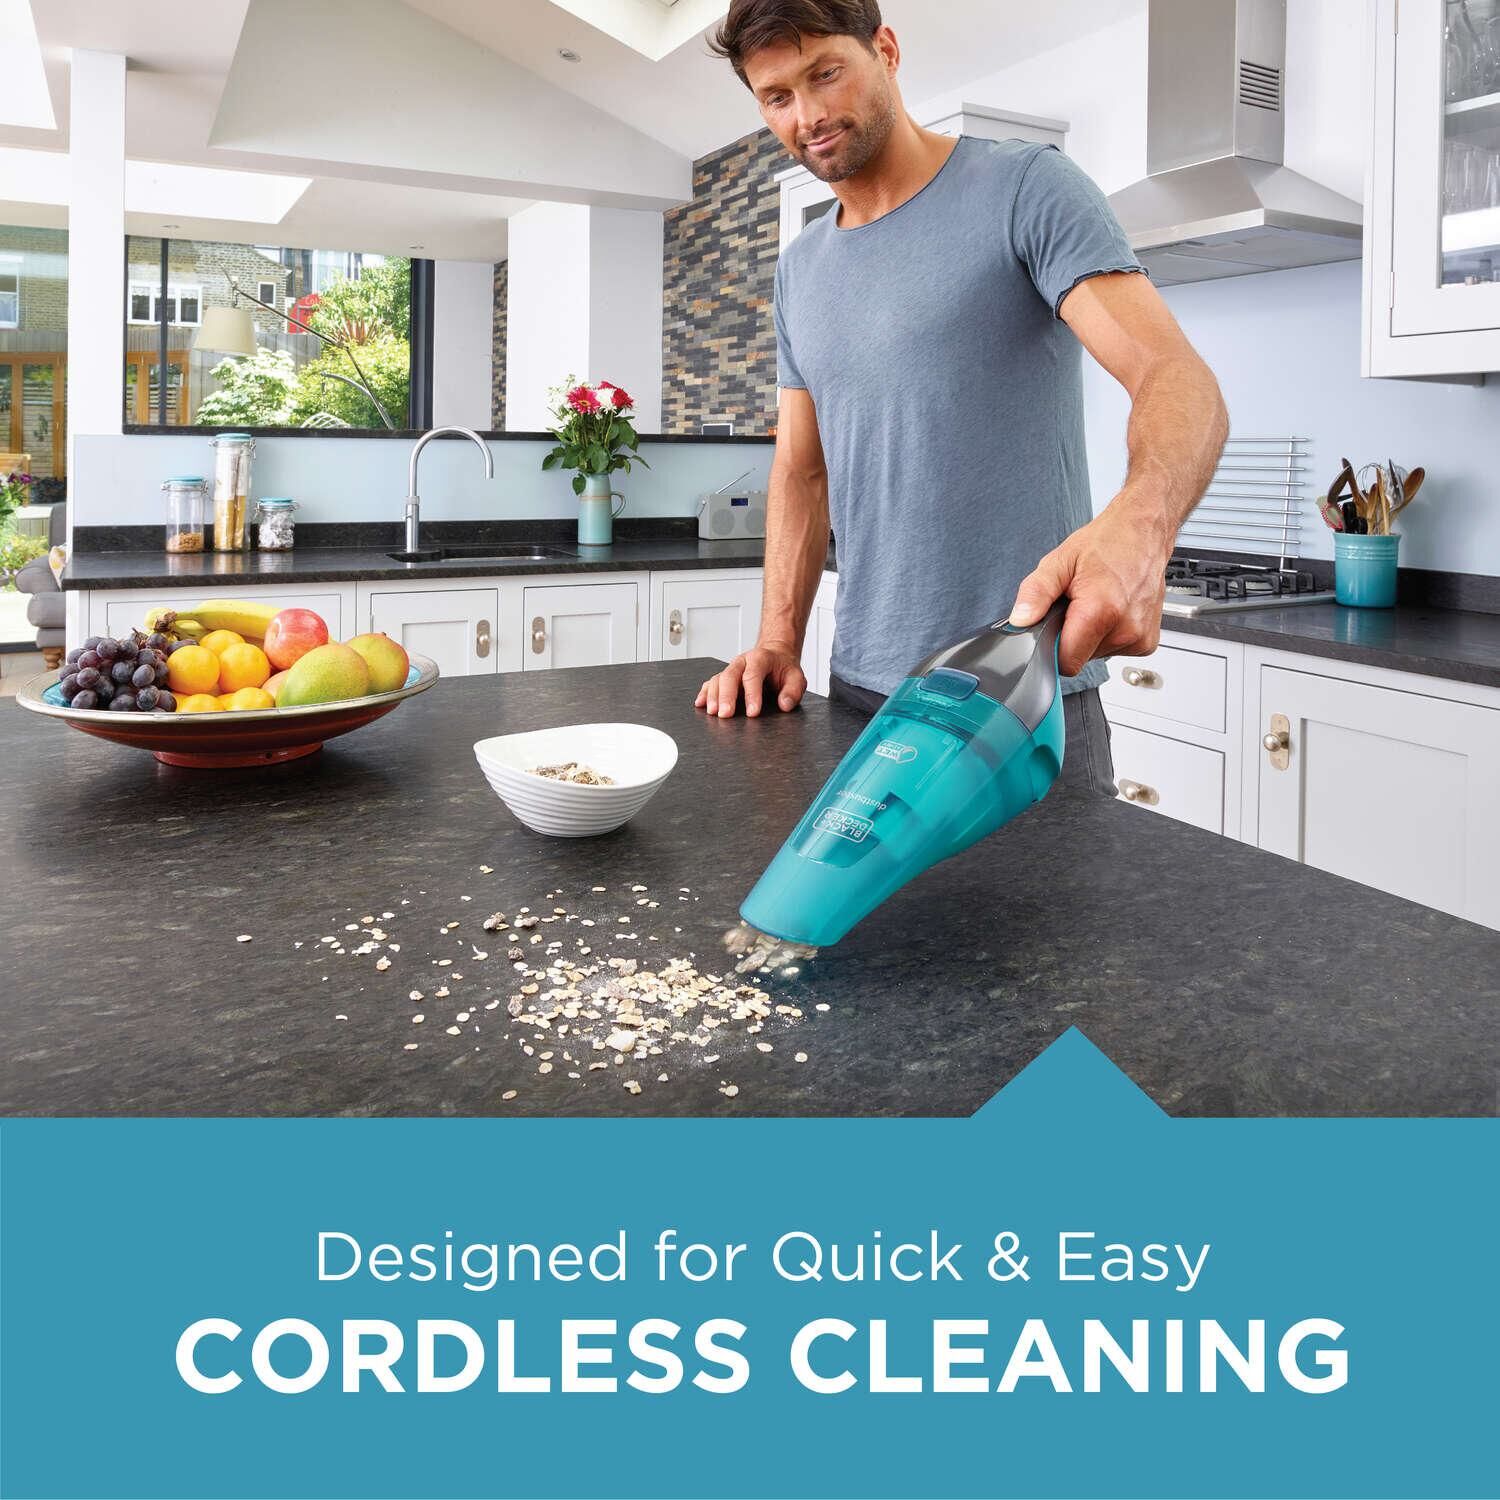 dust buster Quick Clean Cordless Hand Vacuum wet Dry being used by person to clean pieces of food from kitchen shelf.